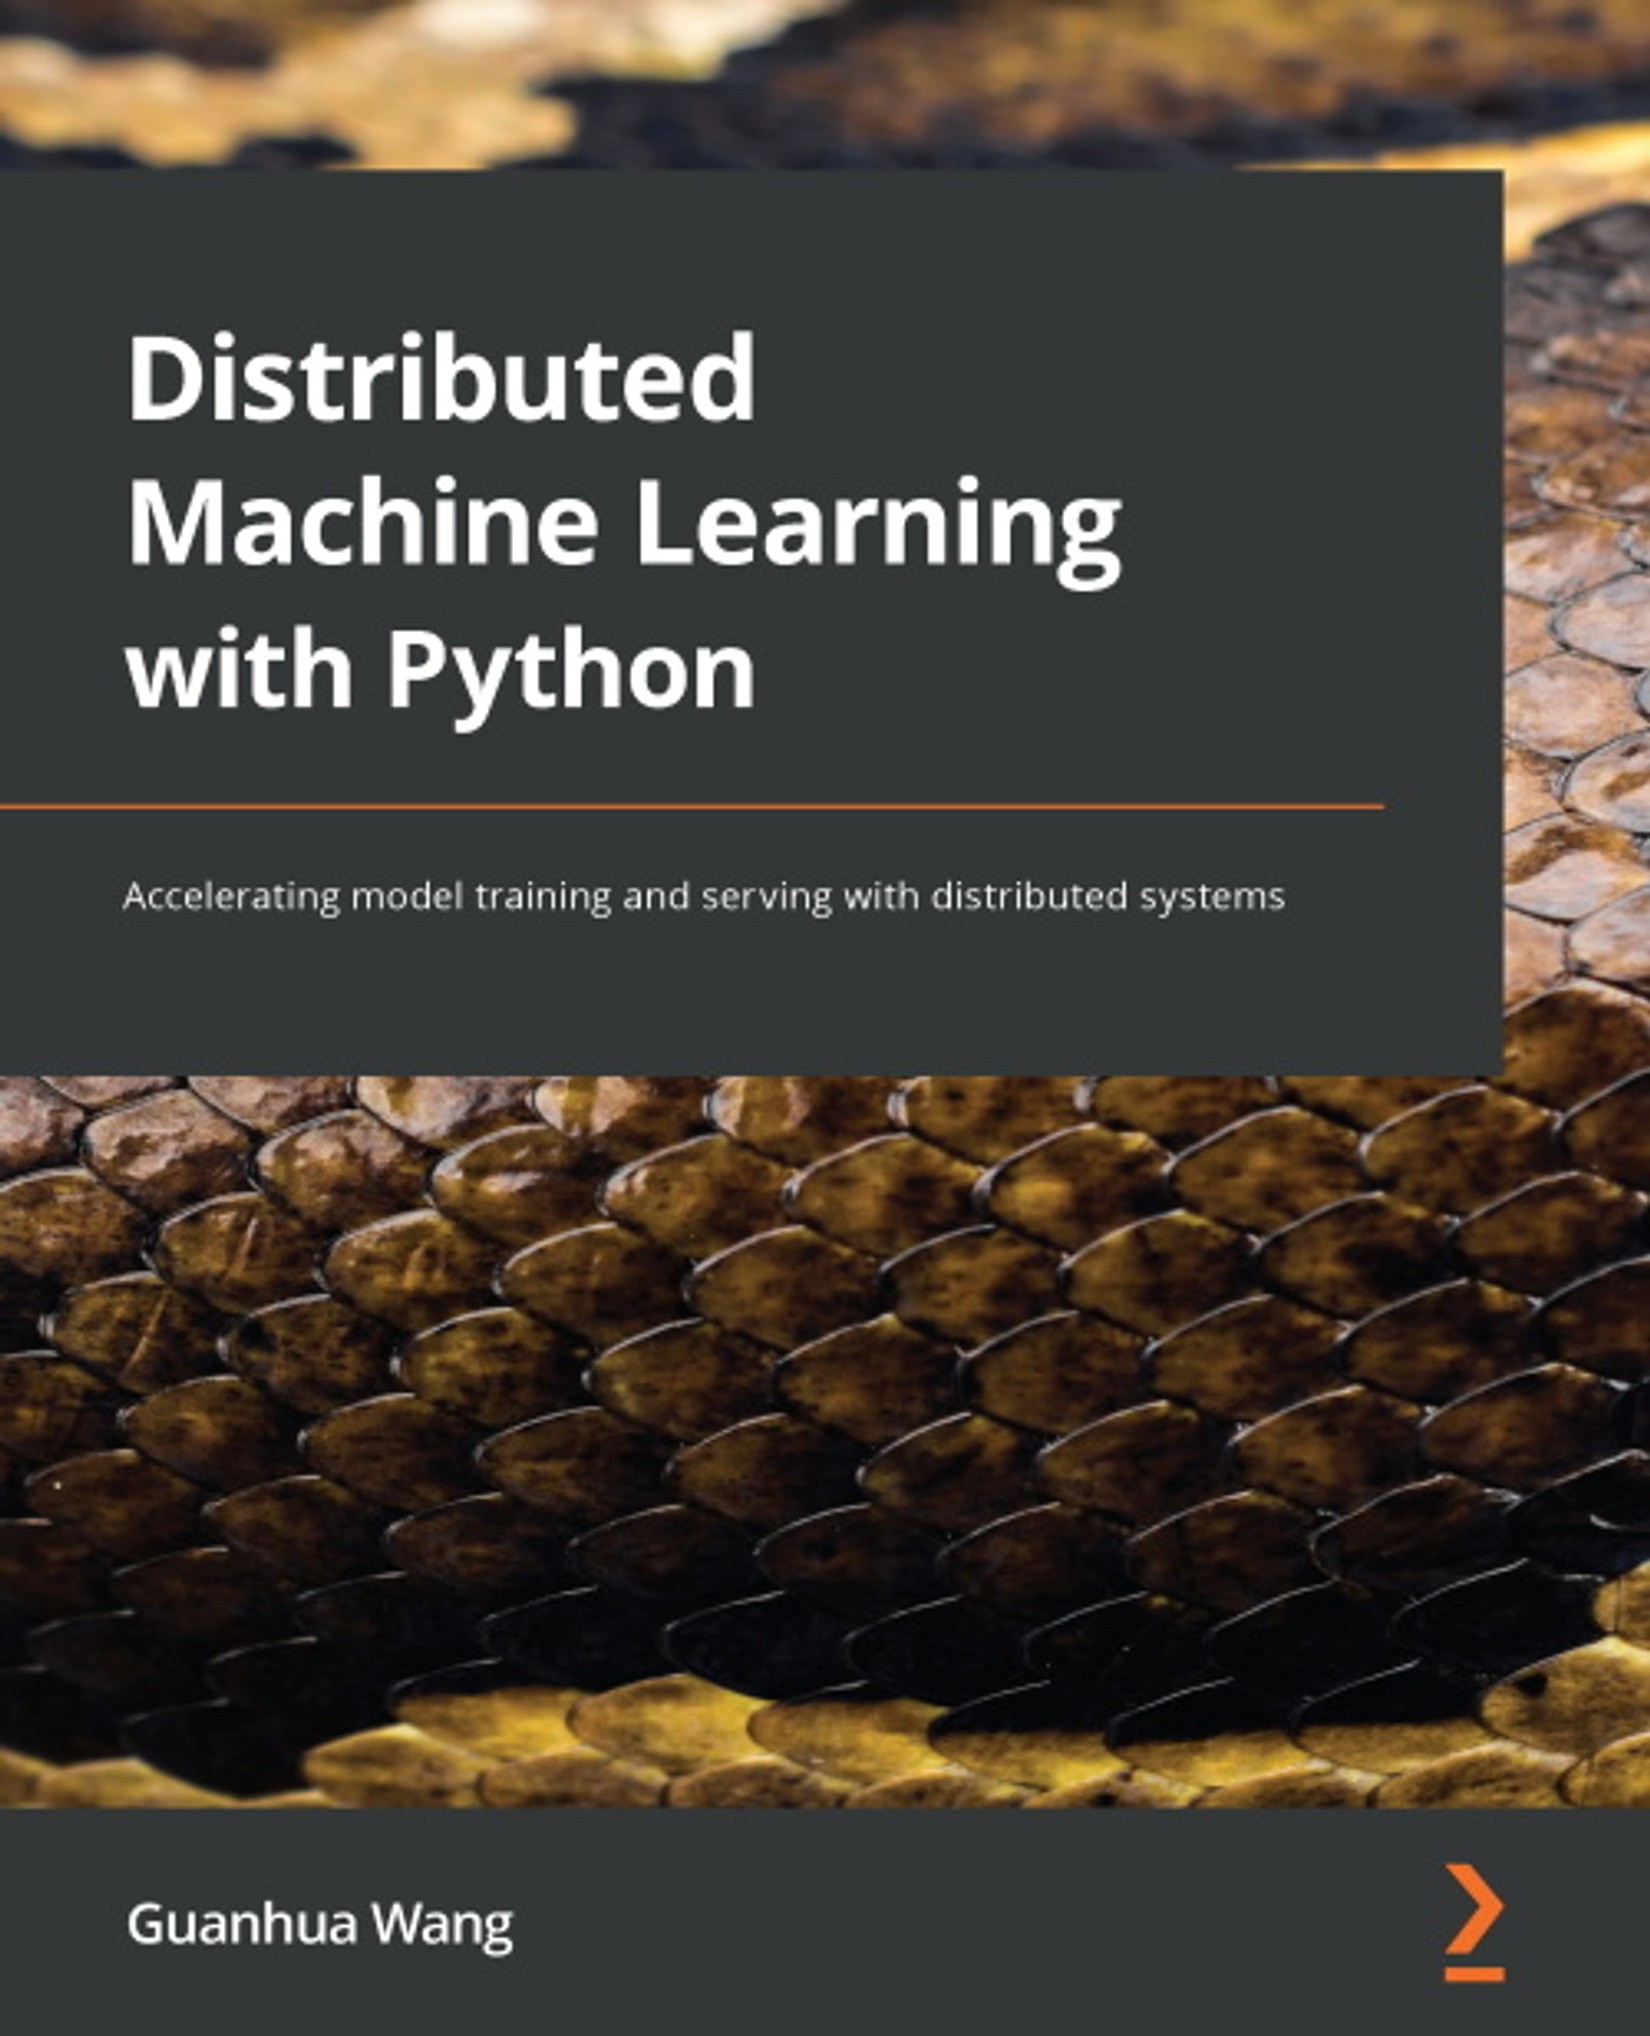 Distributed Machine Learning With Python: Accelerating Model Training and Serving With Distributed Systems